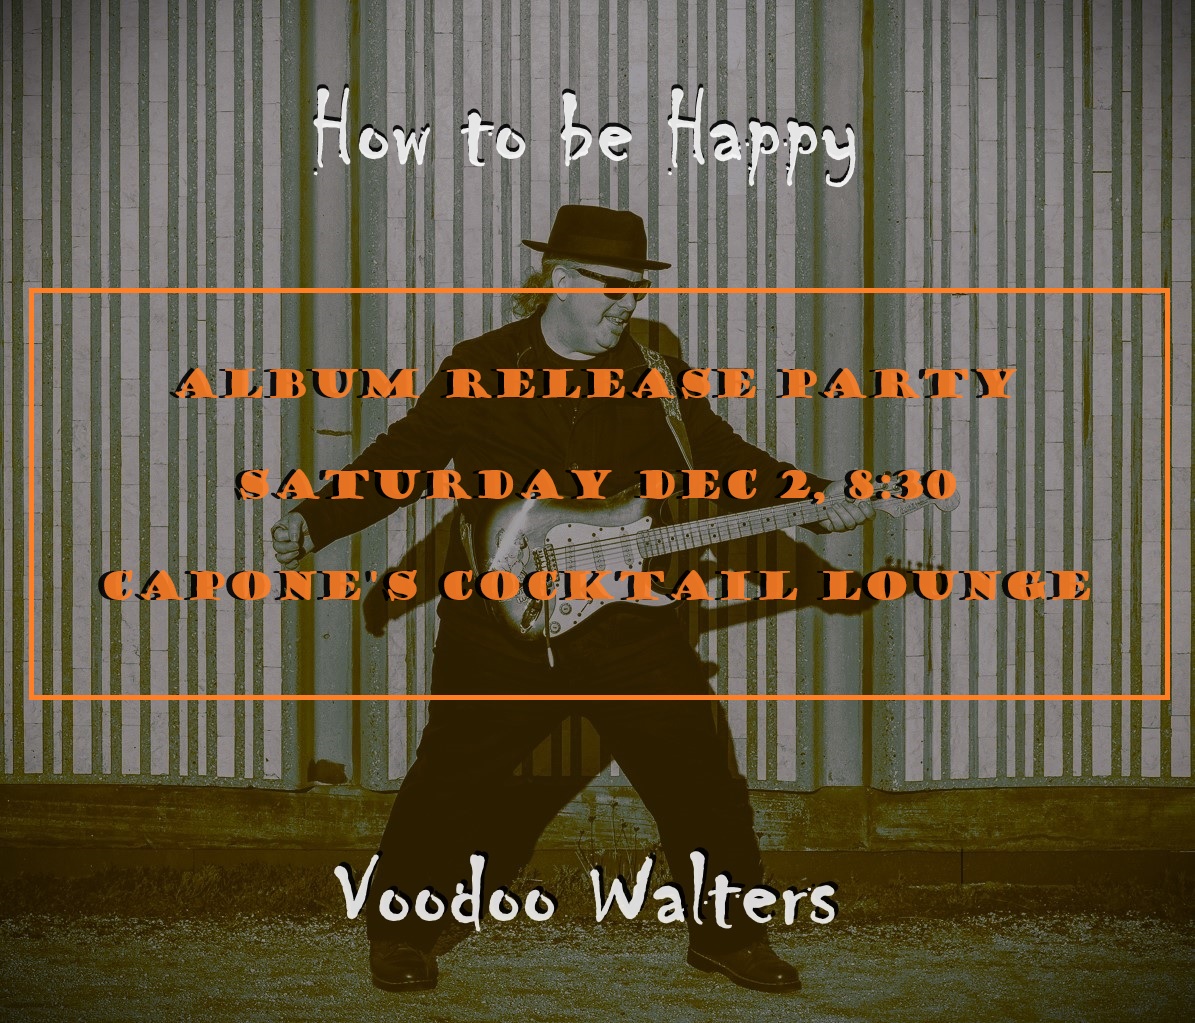 'How to be Happy' album release party, Sat. Dec. 2nd at Capone's Cocktail Lounge. Be there! #ibelieveinvoodoo #howtobehappy #albumreleaseparty #livemusicisbest #torontoblues #livemusictoronto